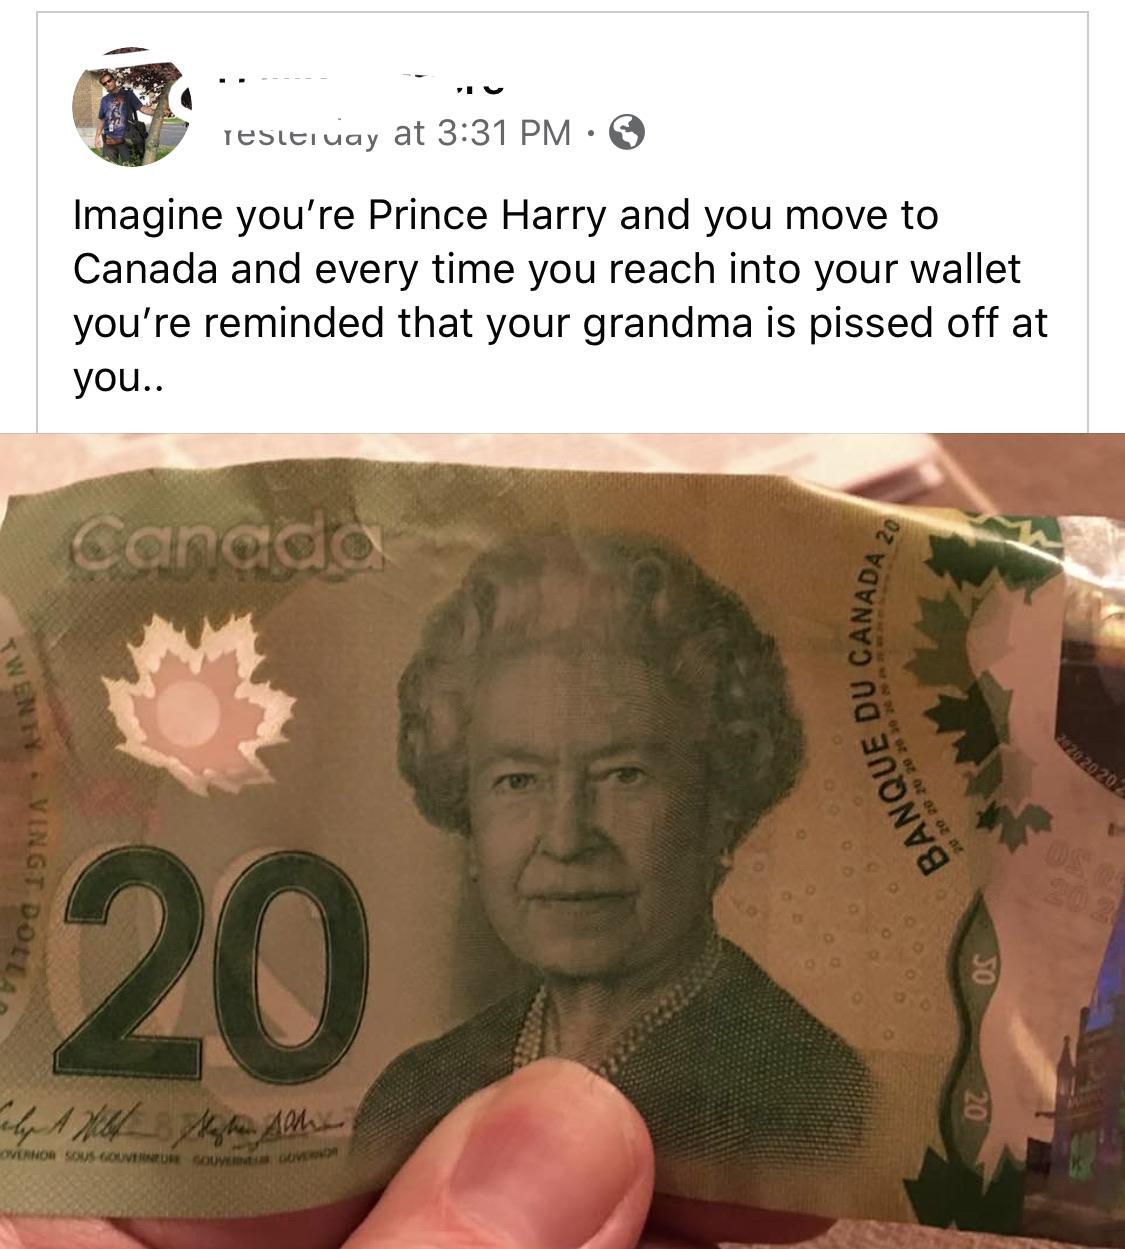 cash - resttiuay at Imagine you're Prince Harry and you move to Canada and every time you reach into your wallet you're reminded that your grandma is pissed off at you.. Canada Wenty 102020202 Nque Du Canada Banque Du Vingt D. Ngt Dollar 20 helpt het lehe